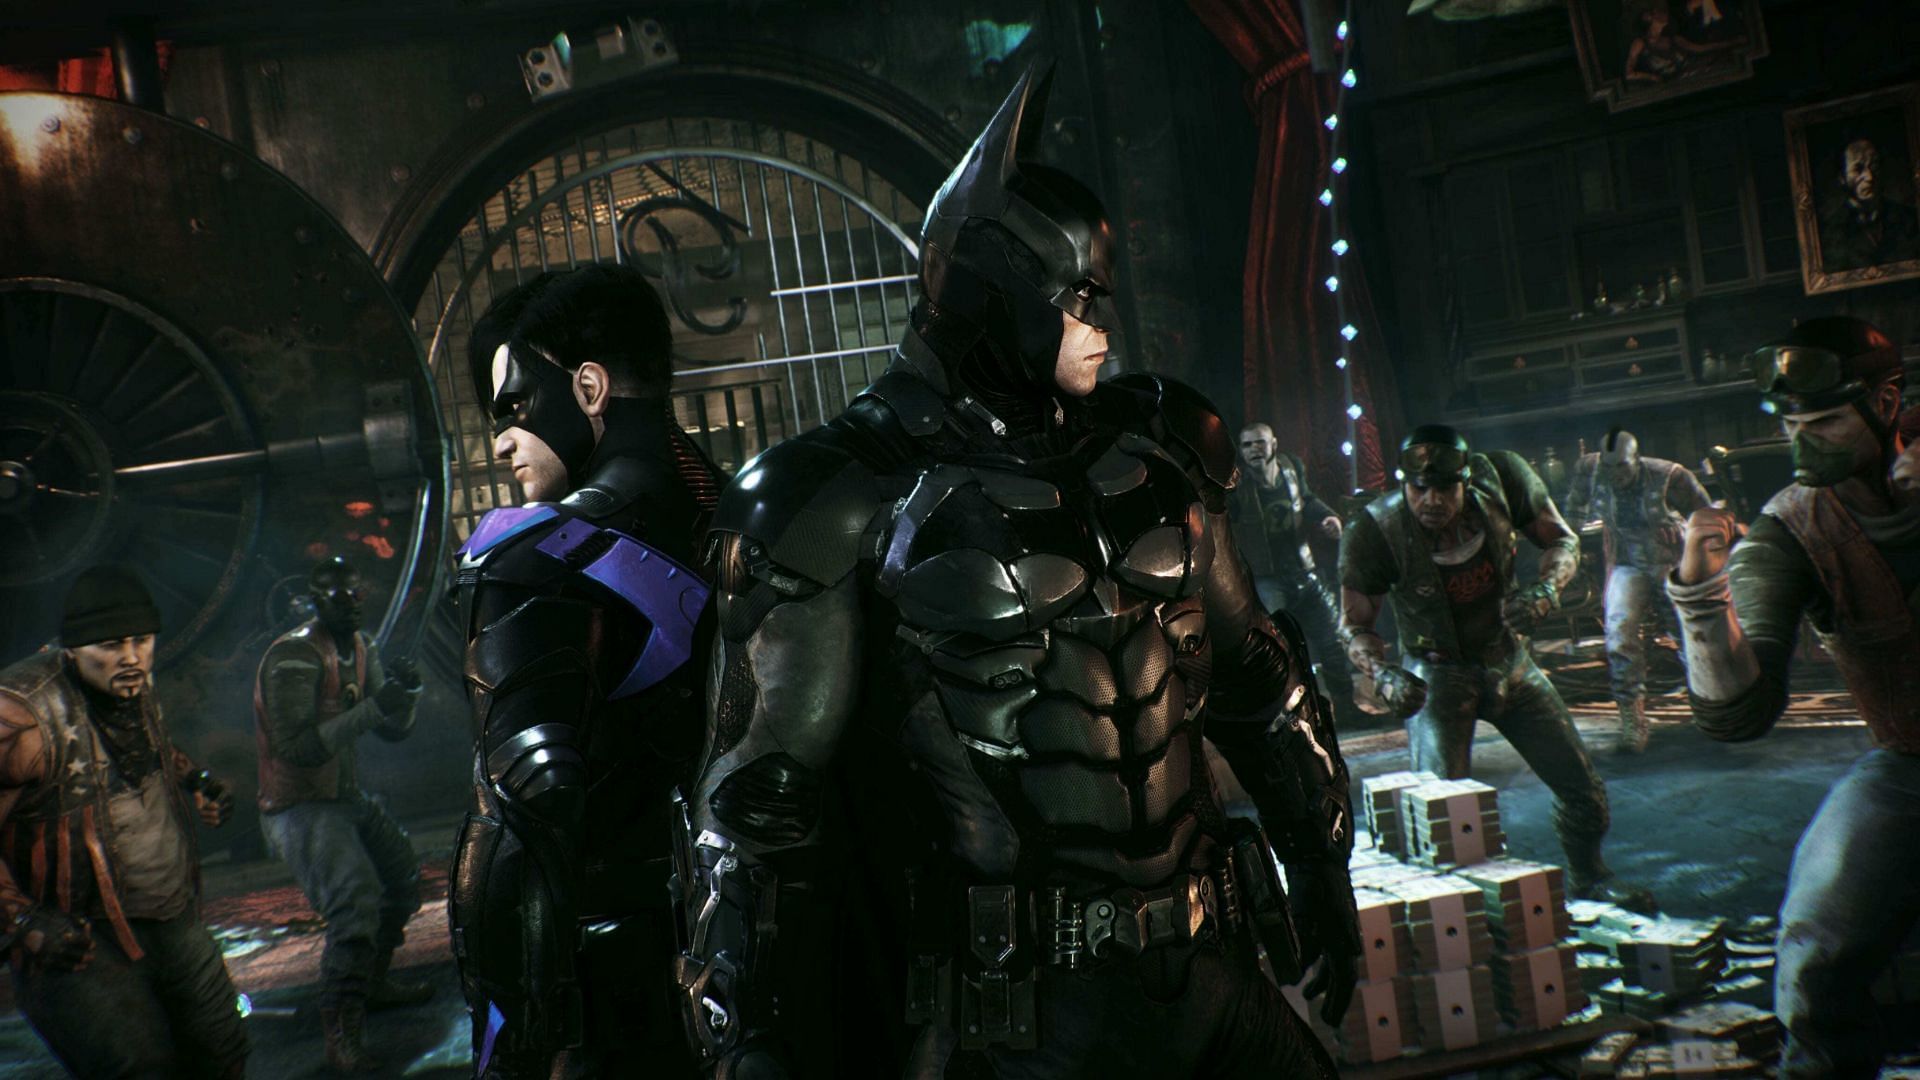 Batman &amp; Nightwing square off against some thugs (Image via Rocksteady)